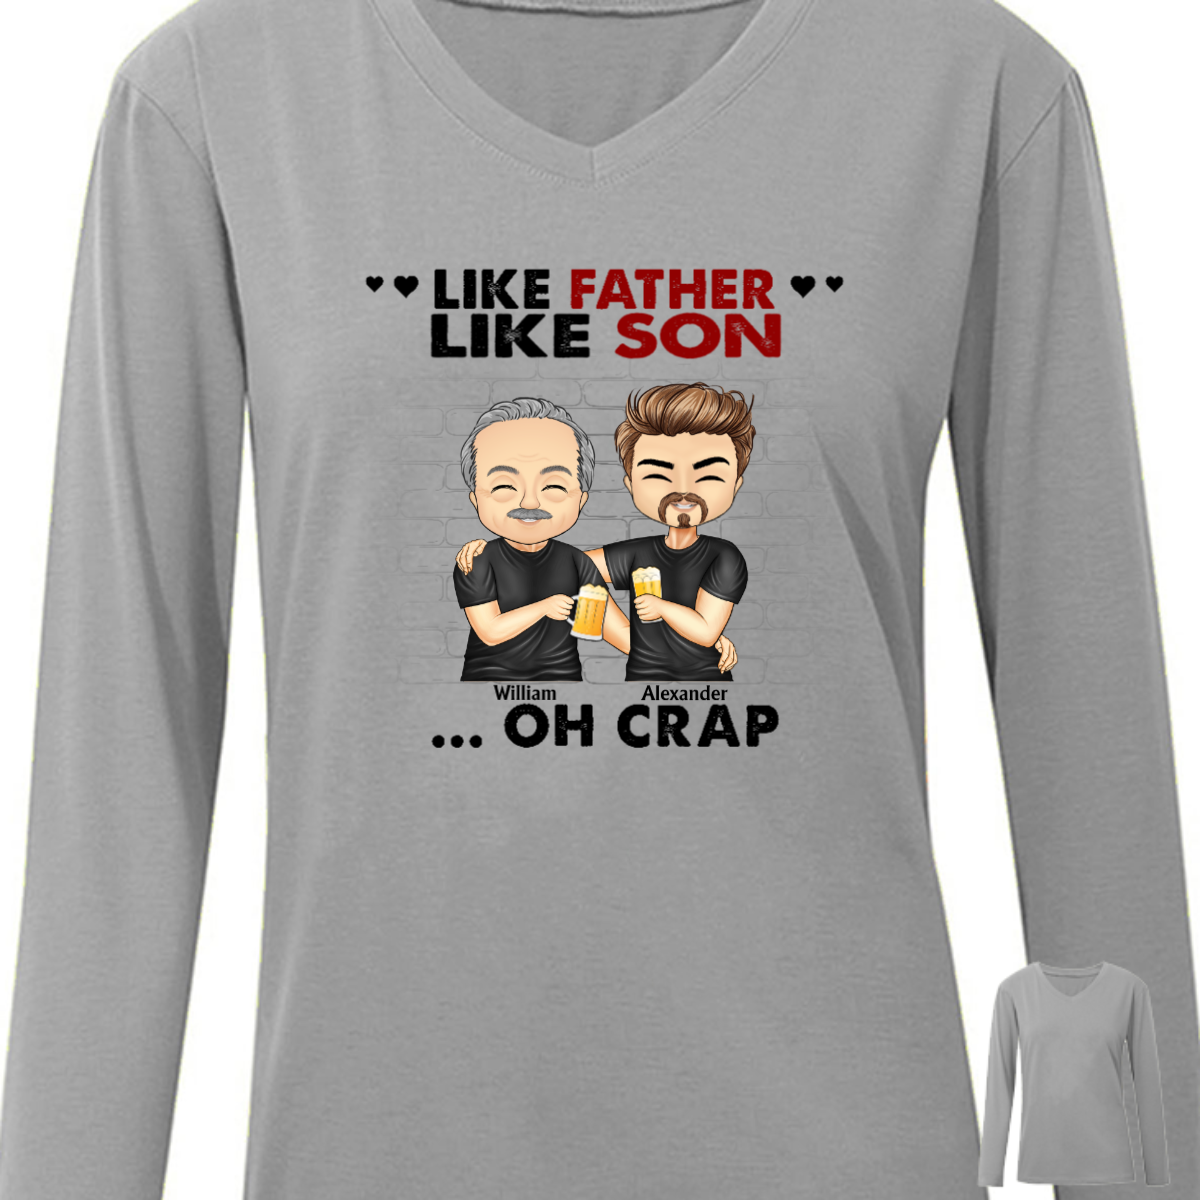 Like Father Like Daughter Son - Father Gift - Personalized Long Sleeve Shirt